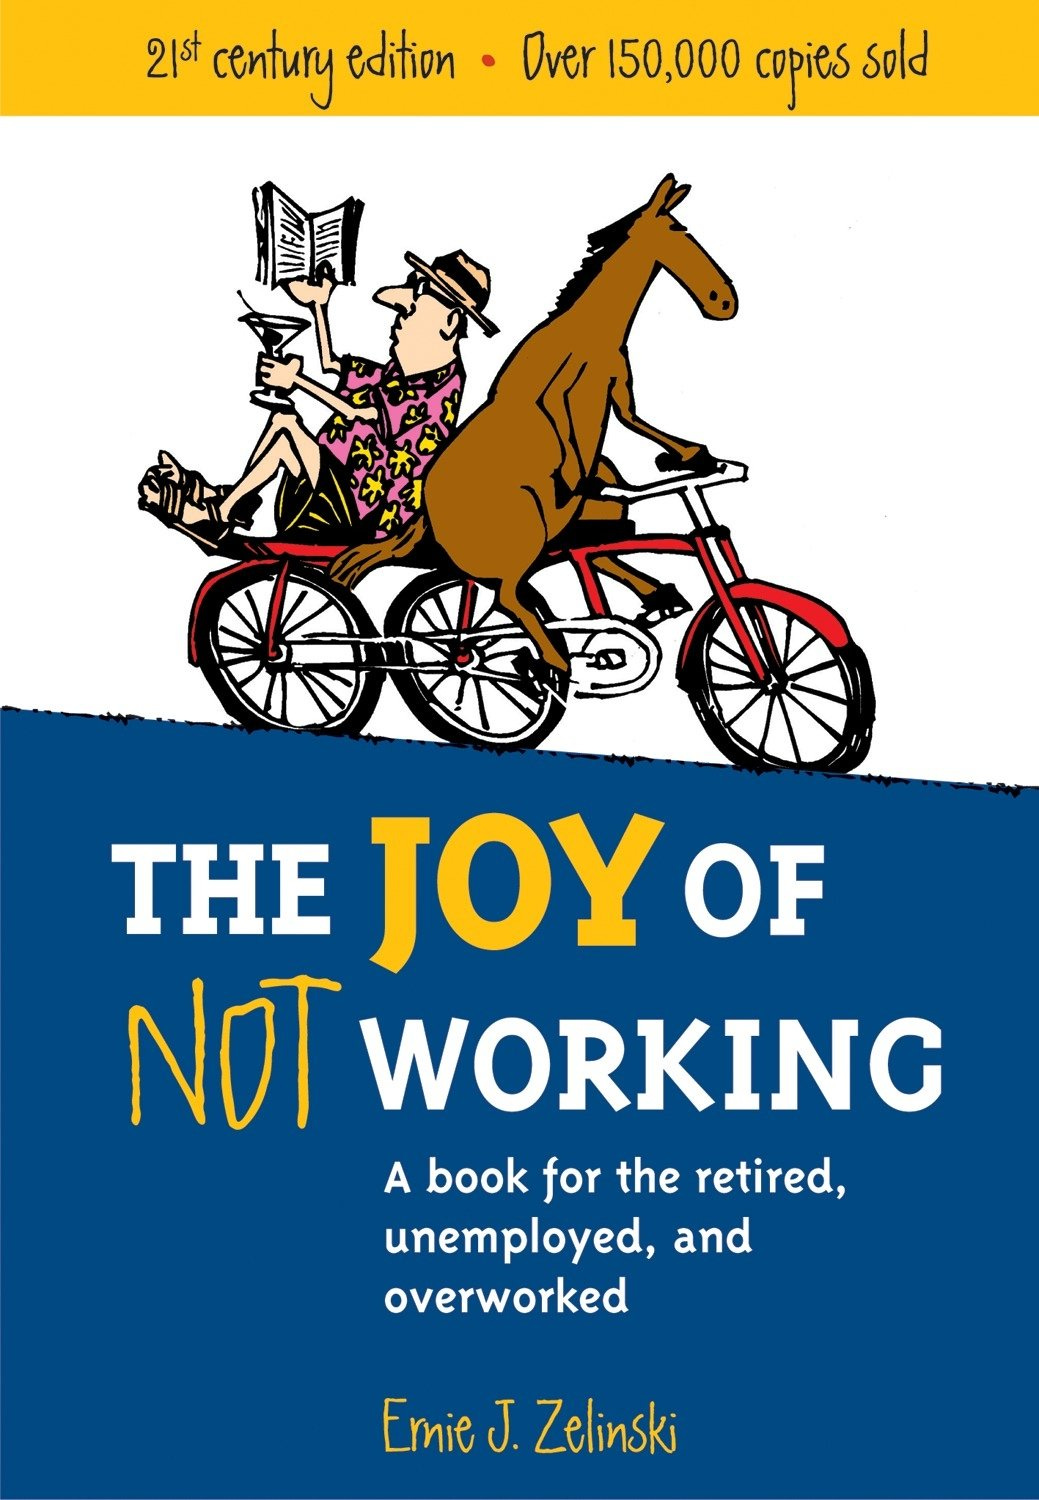 The Joy of Not Working: A Book for the Retired, Unemployed and Overworked-  21st Century Edition: Zelinski, Ernie J.: 8601200635614: Amazon.com: Books